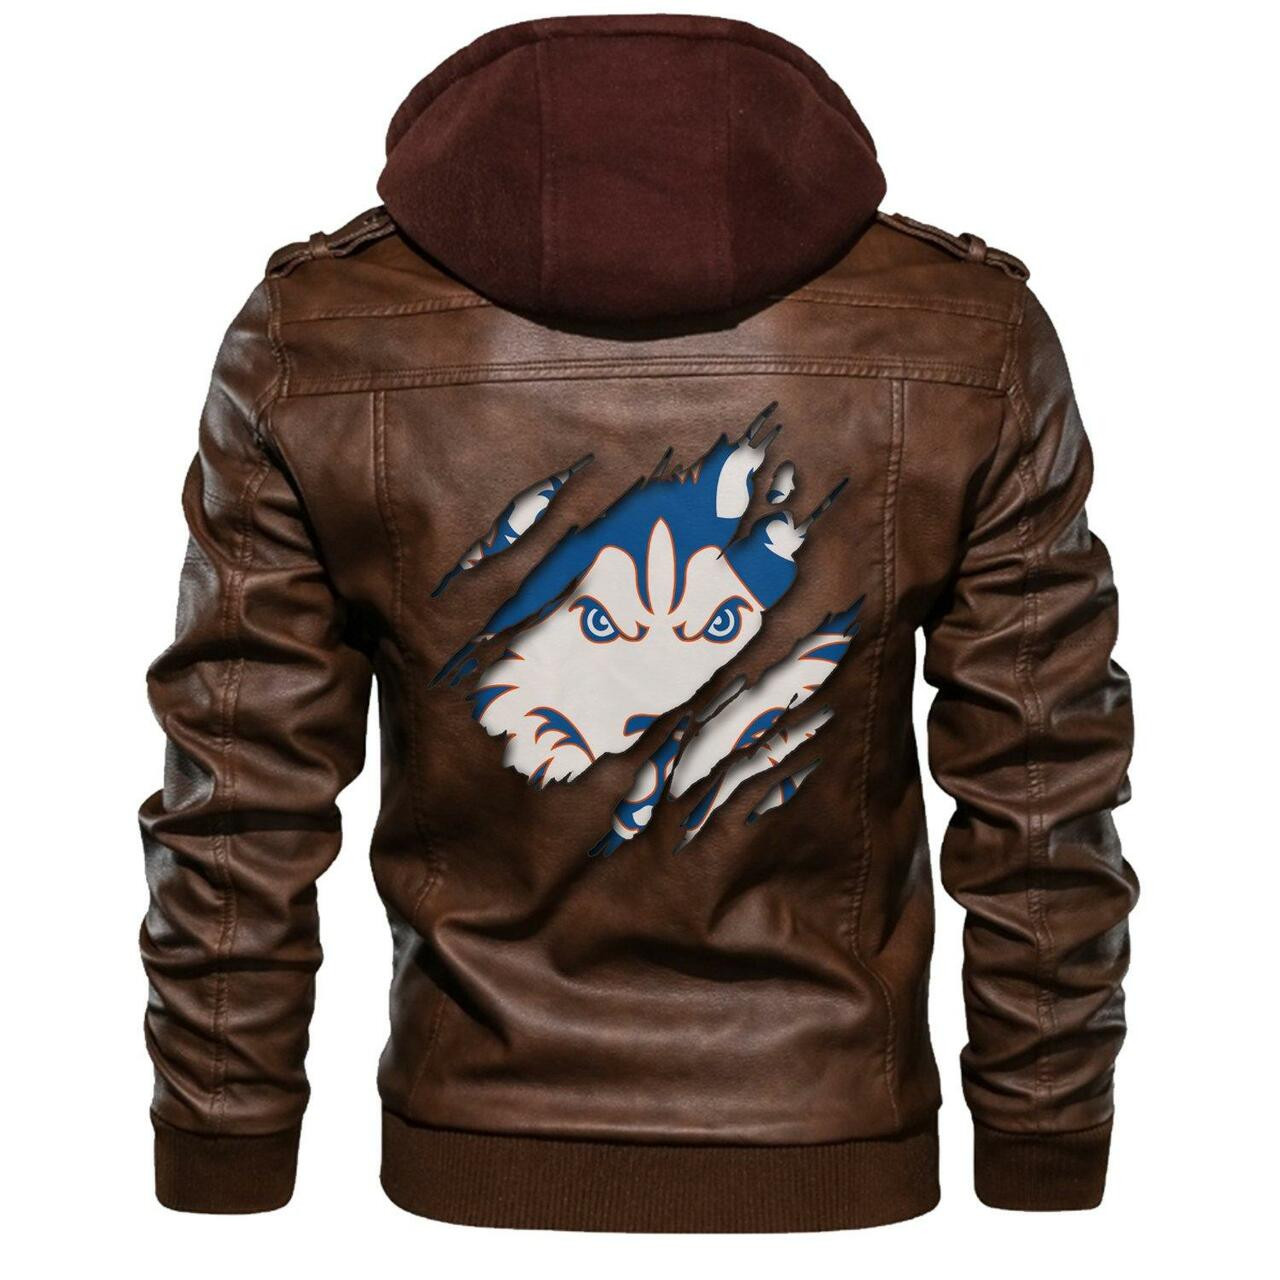 You can find a good leather jacket by access our website 48